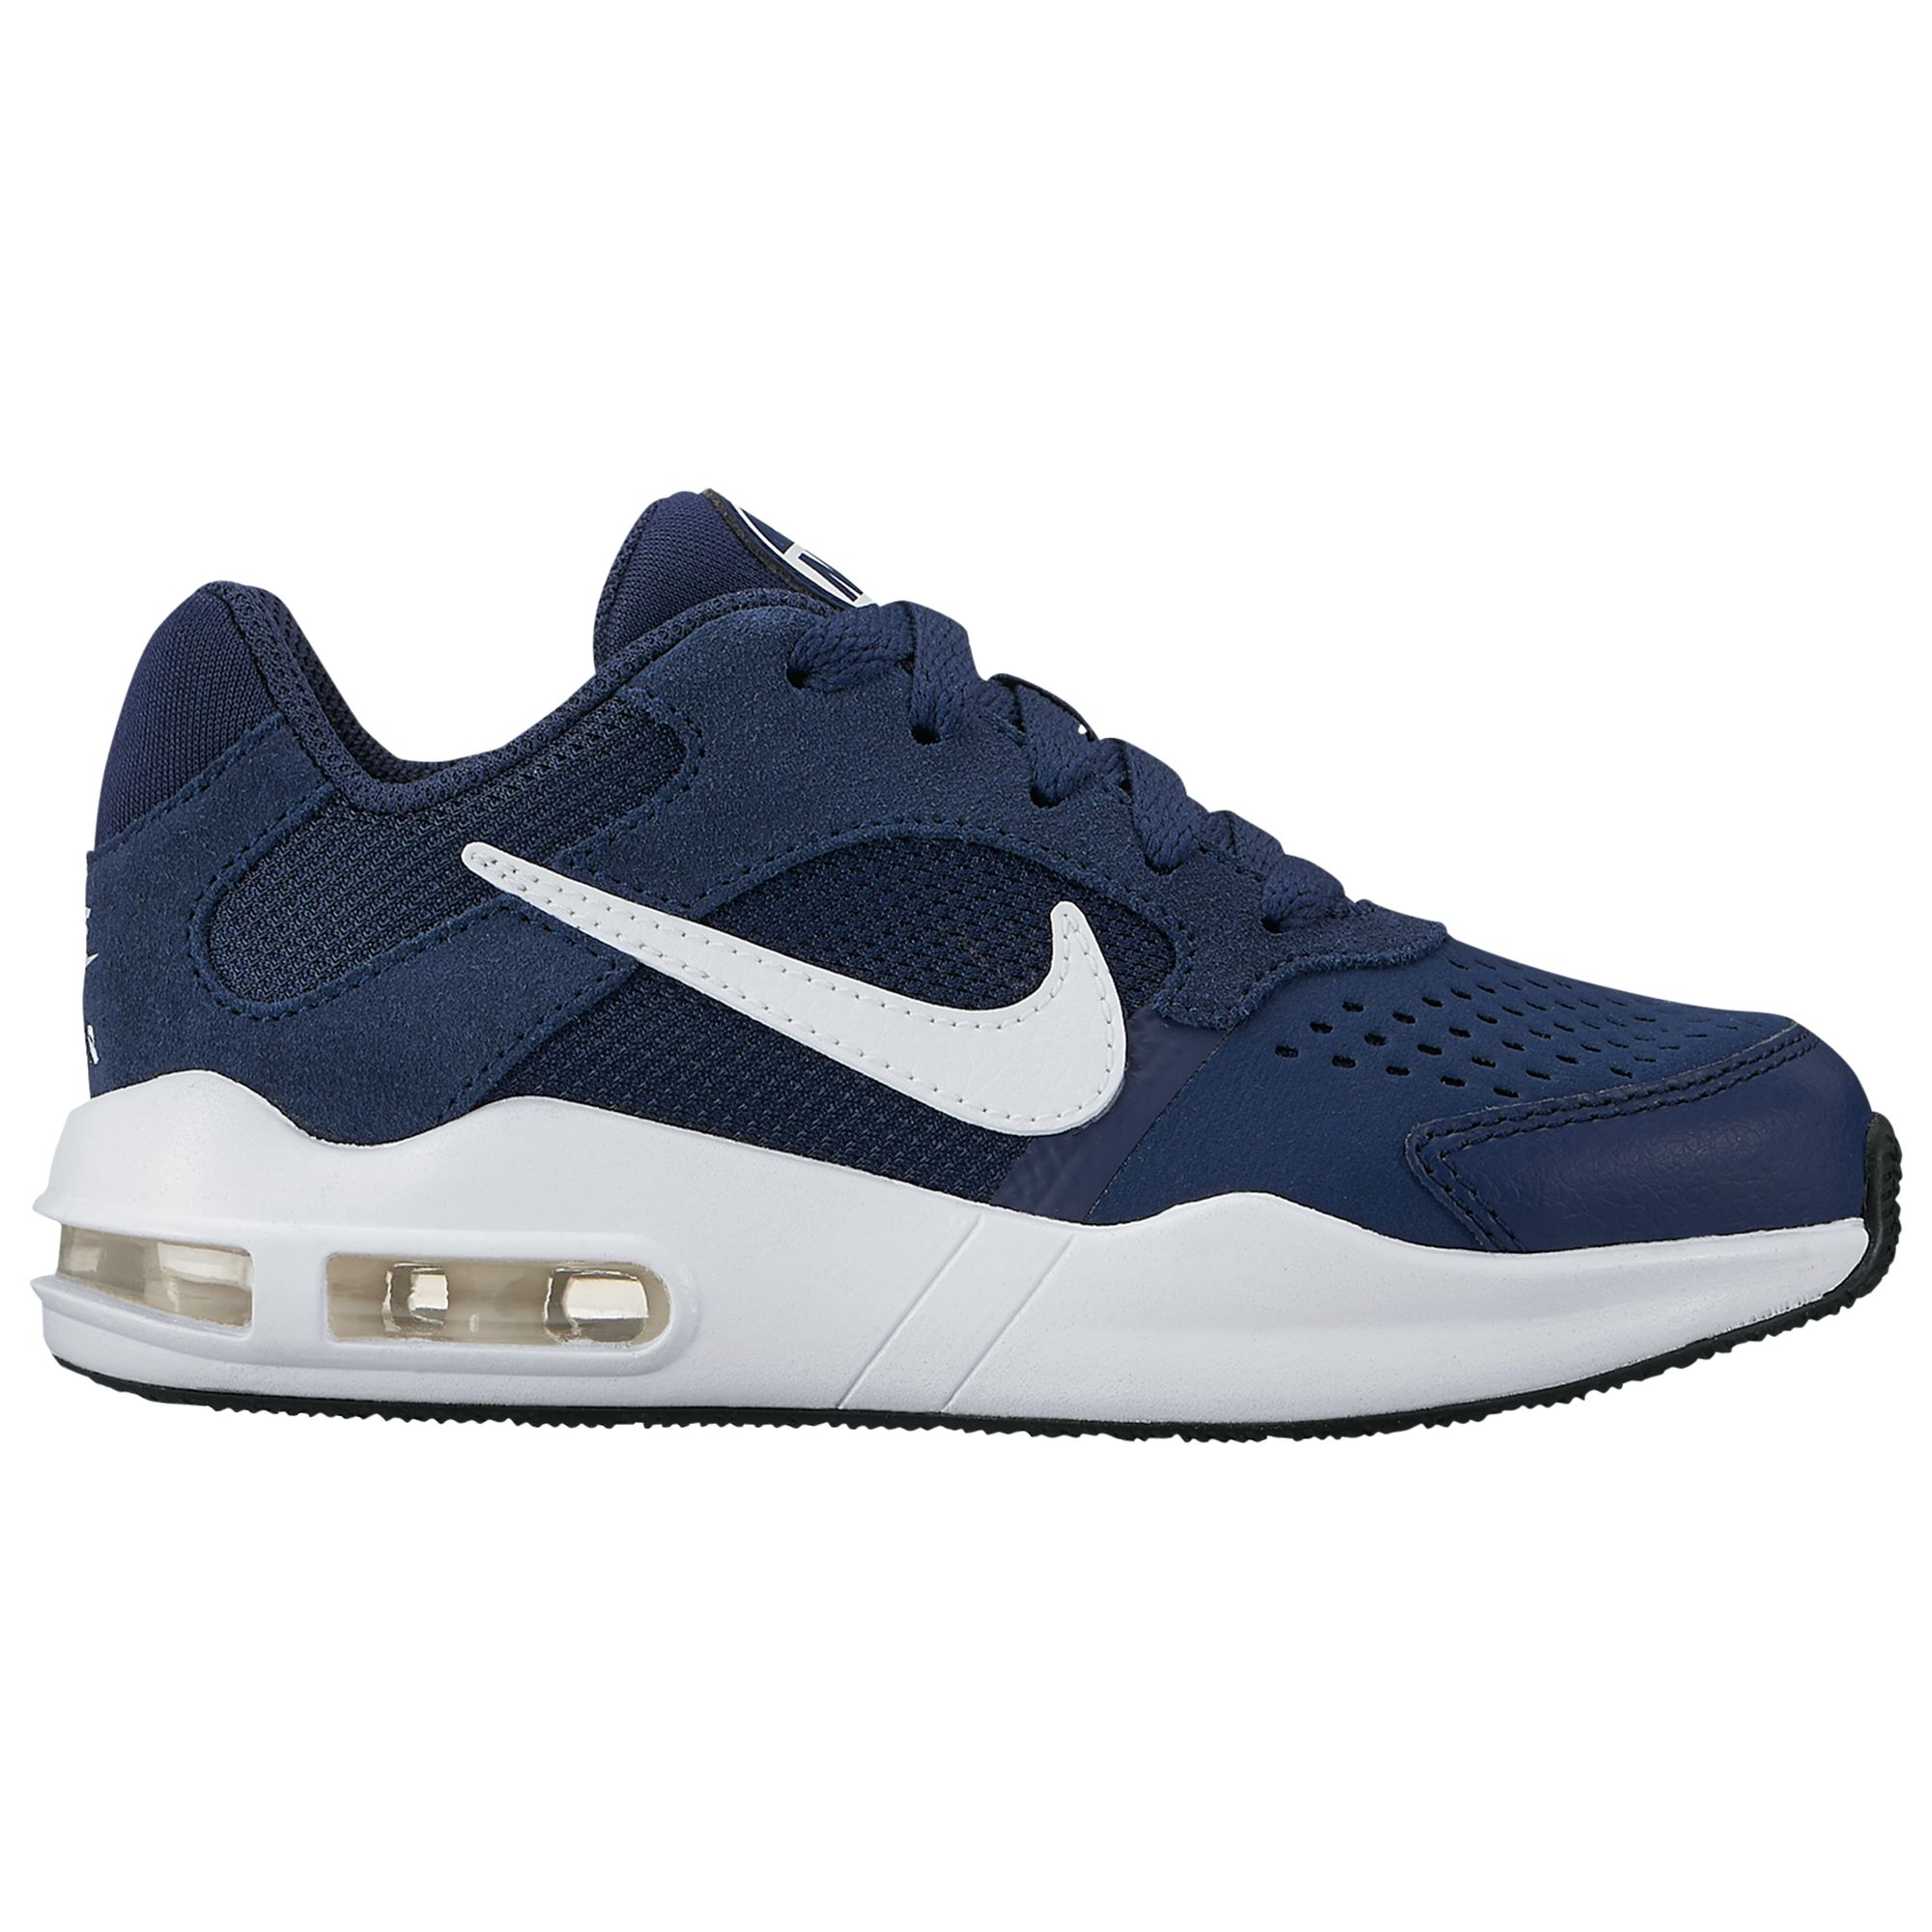 Air Max Guile Trainers, Navy/White 